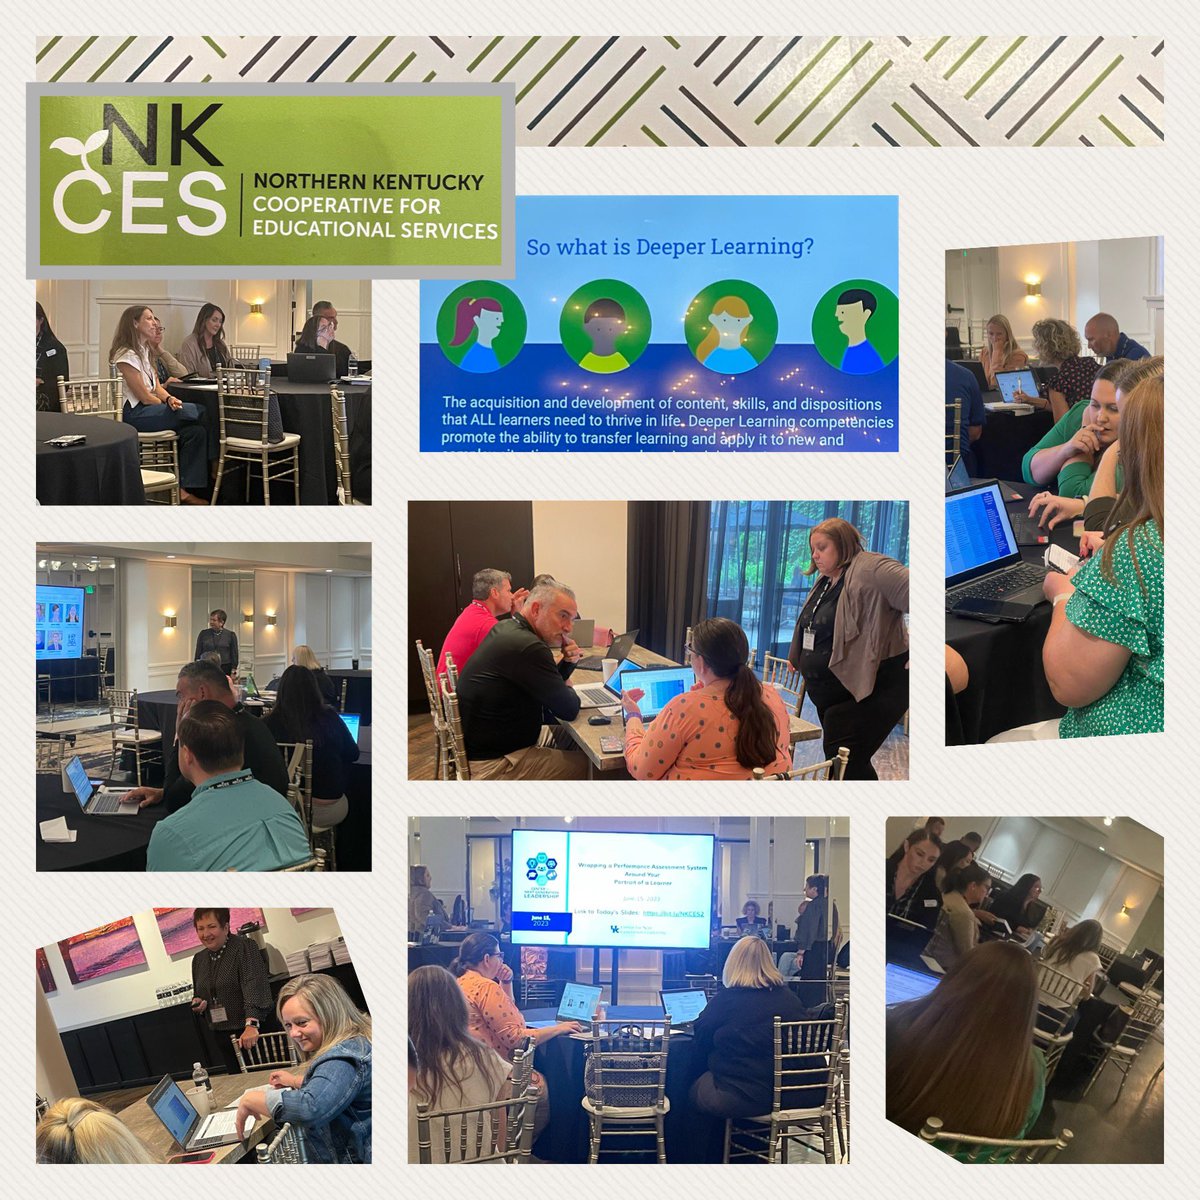 What an energizing morning at the NKCES Deeper Learning Summit! Enjoyed learning alongside our districts with @LuSettlesYoung and @karenperry! @NKCESKids1st #connectgrowserve